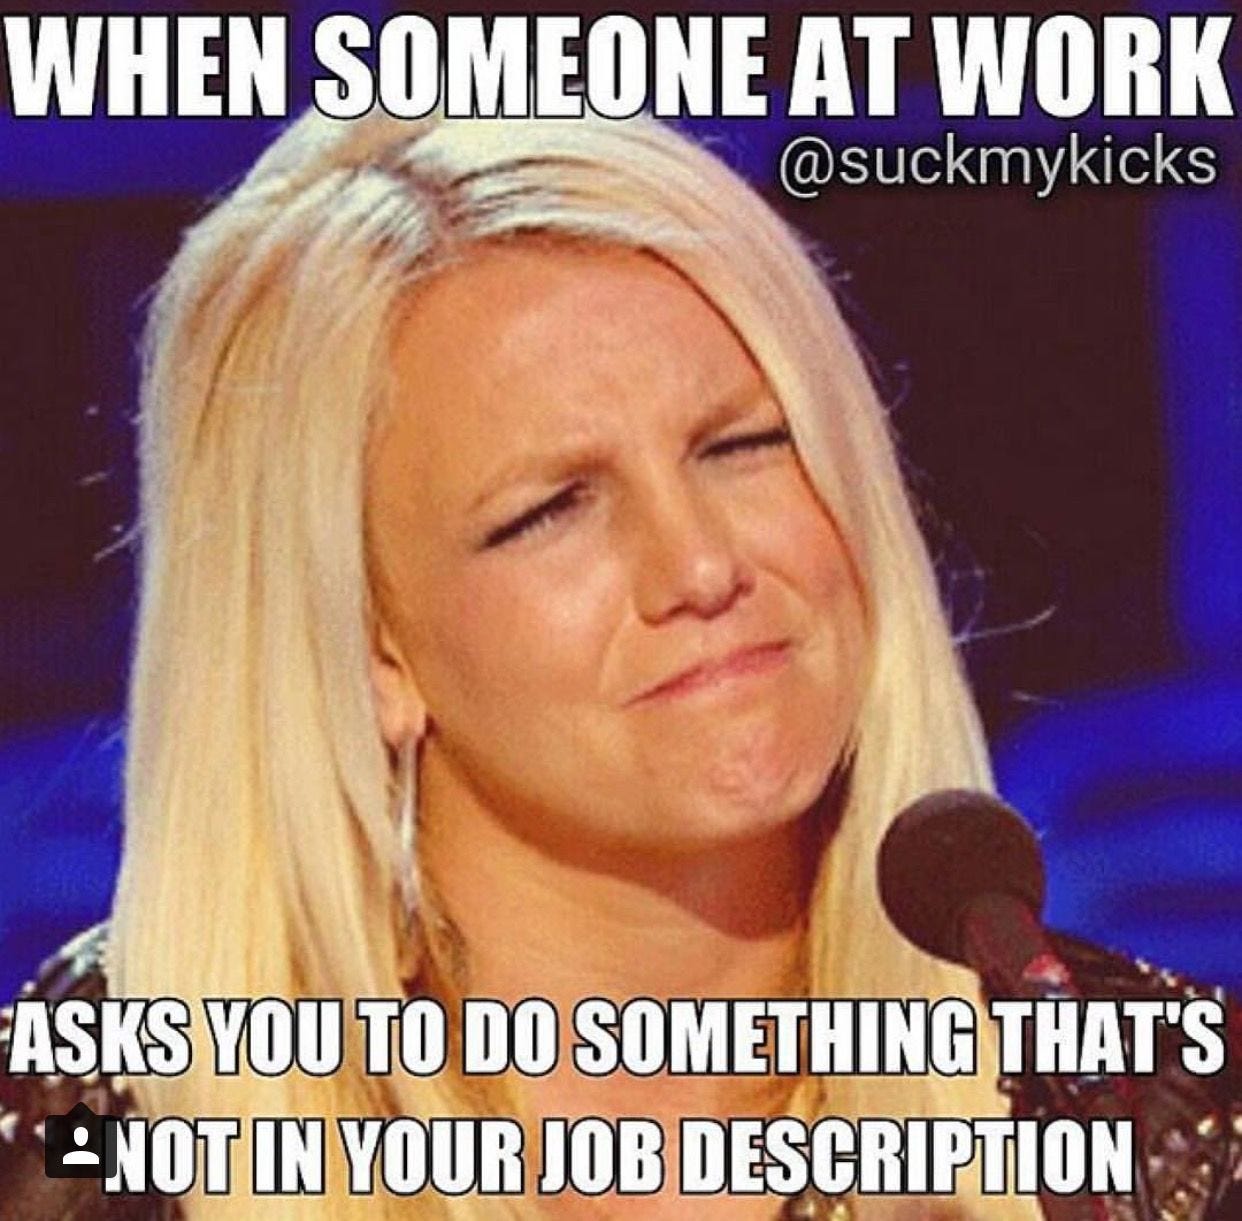 When someone at work ask you to do something that's not in your job  description. | Job humor, Work humor, Jokes quotes